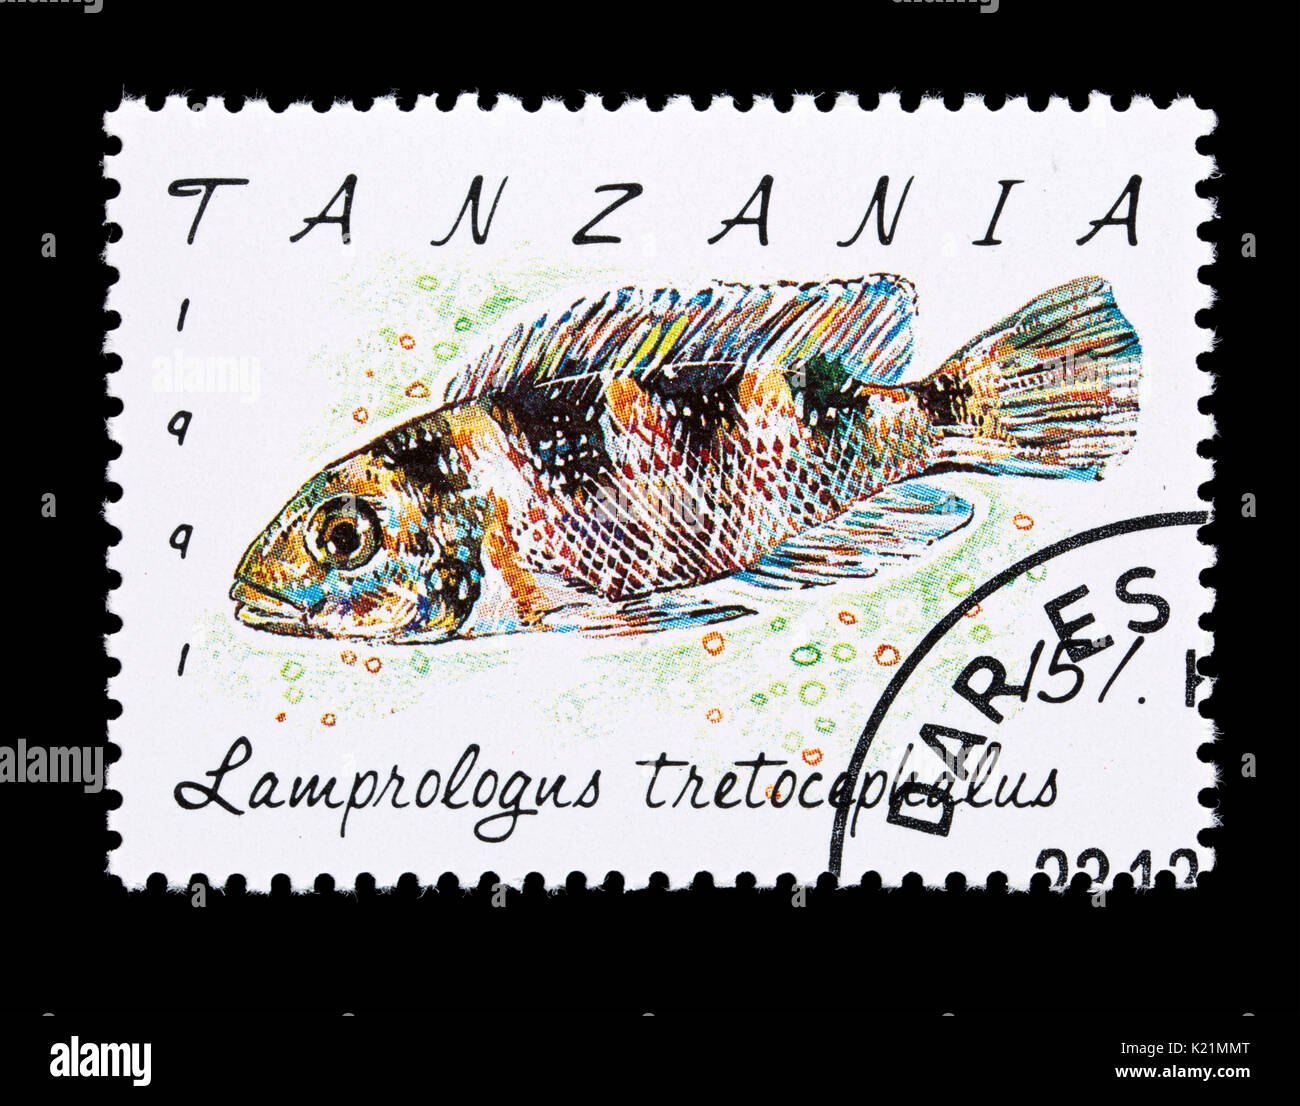 Postage stamp from Tanzania depicting a Five Barred Cichlid (Neolamprologus tretocephalus) Stock Photo